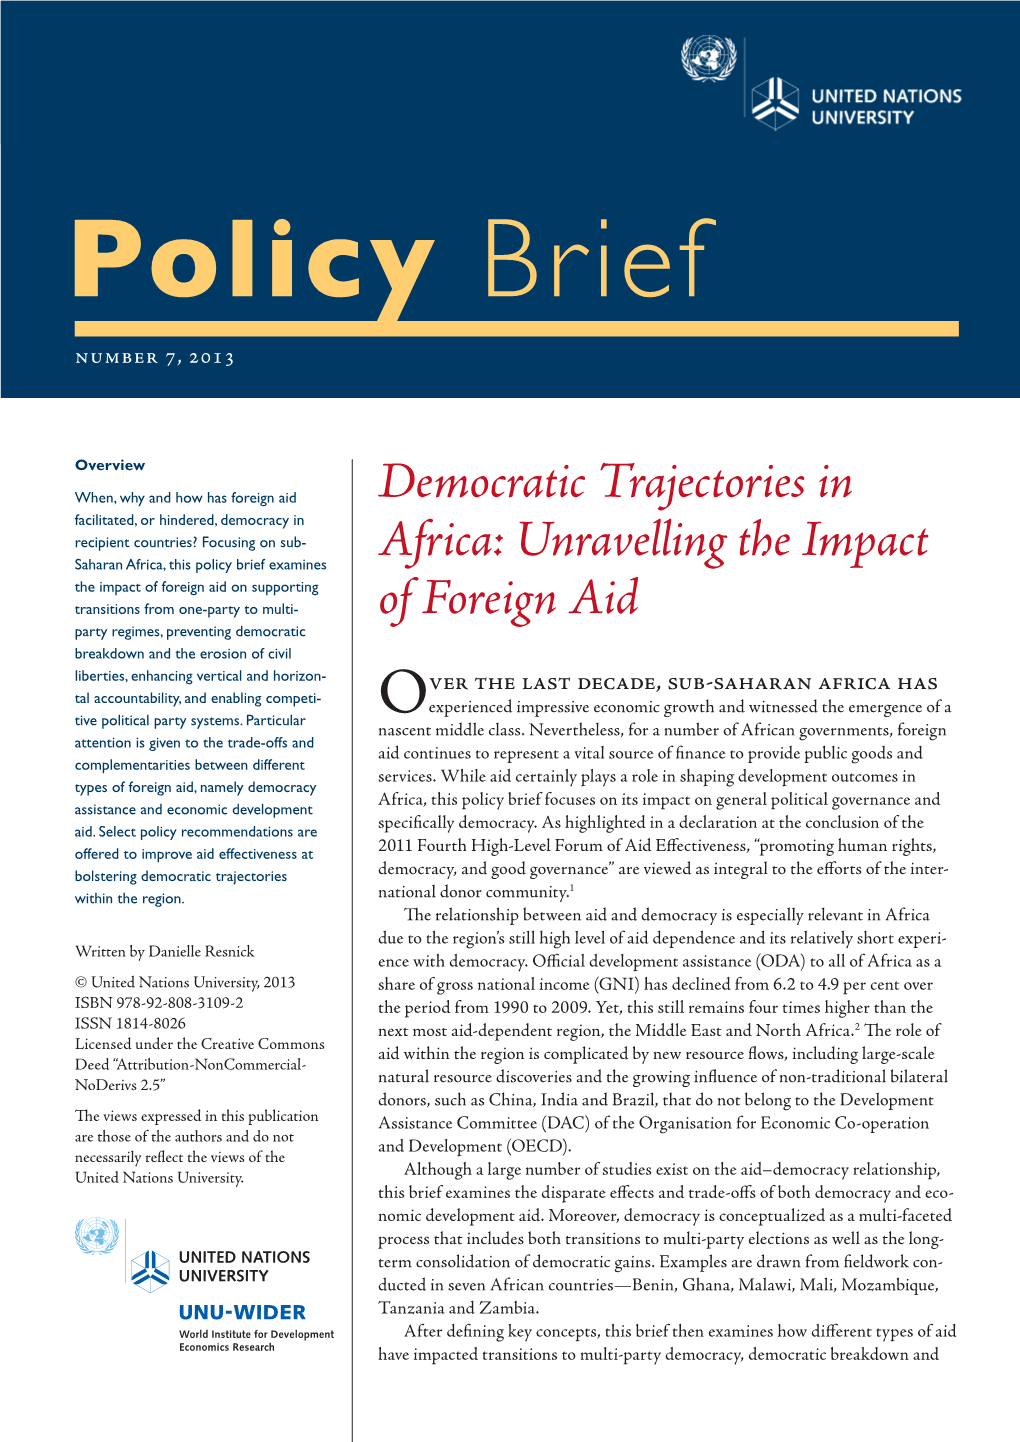 Democratic Trajectories in Africa: Unravelling the Impact of Foreign Aid 3